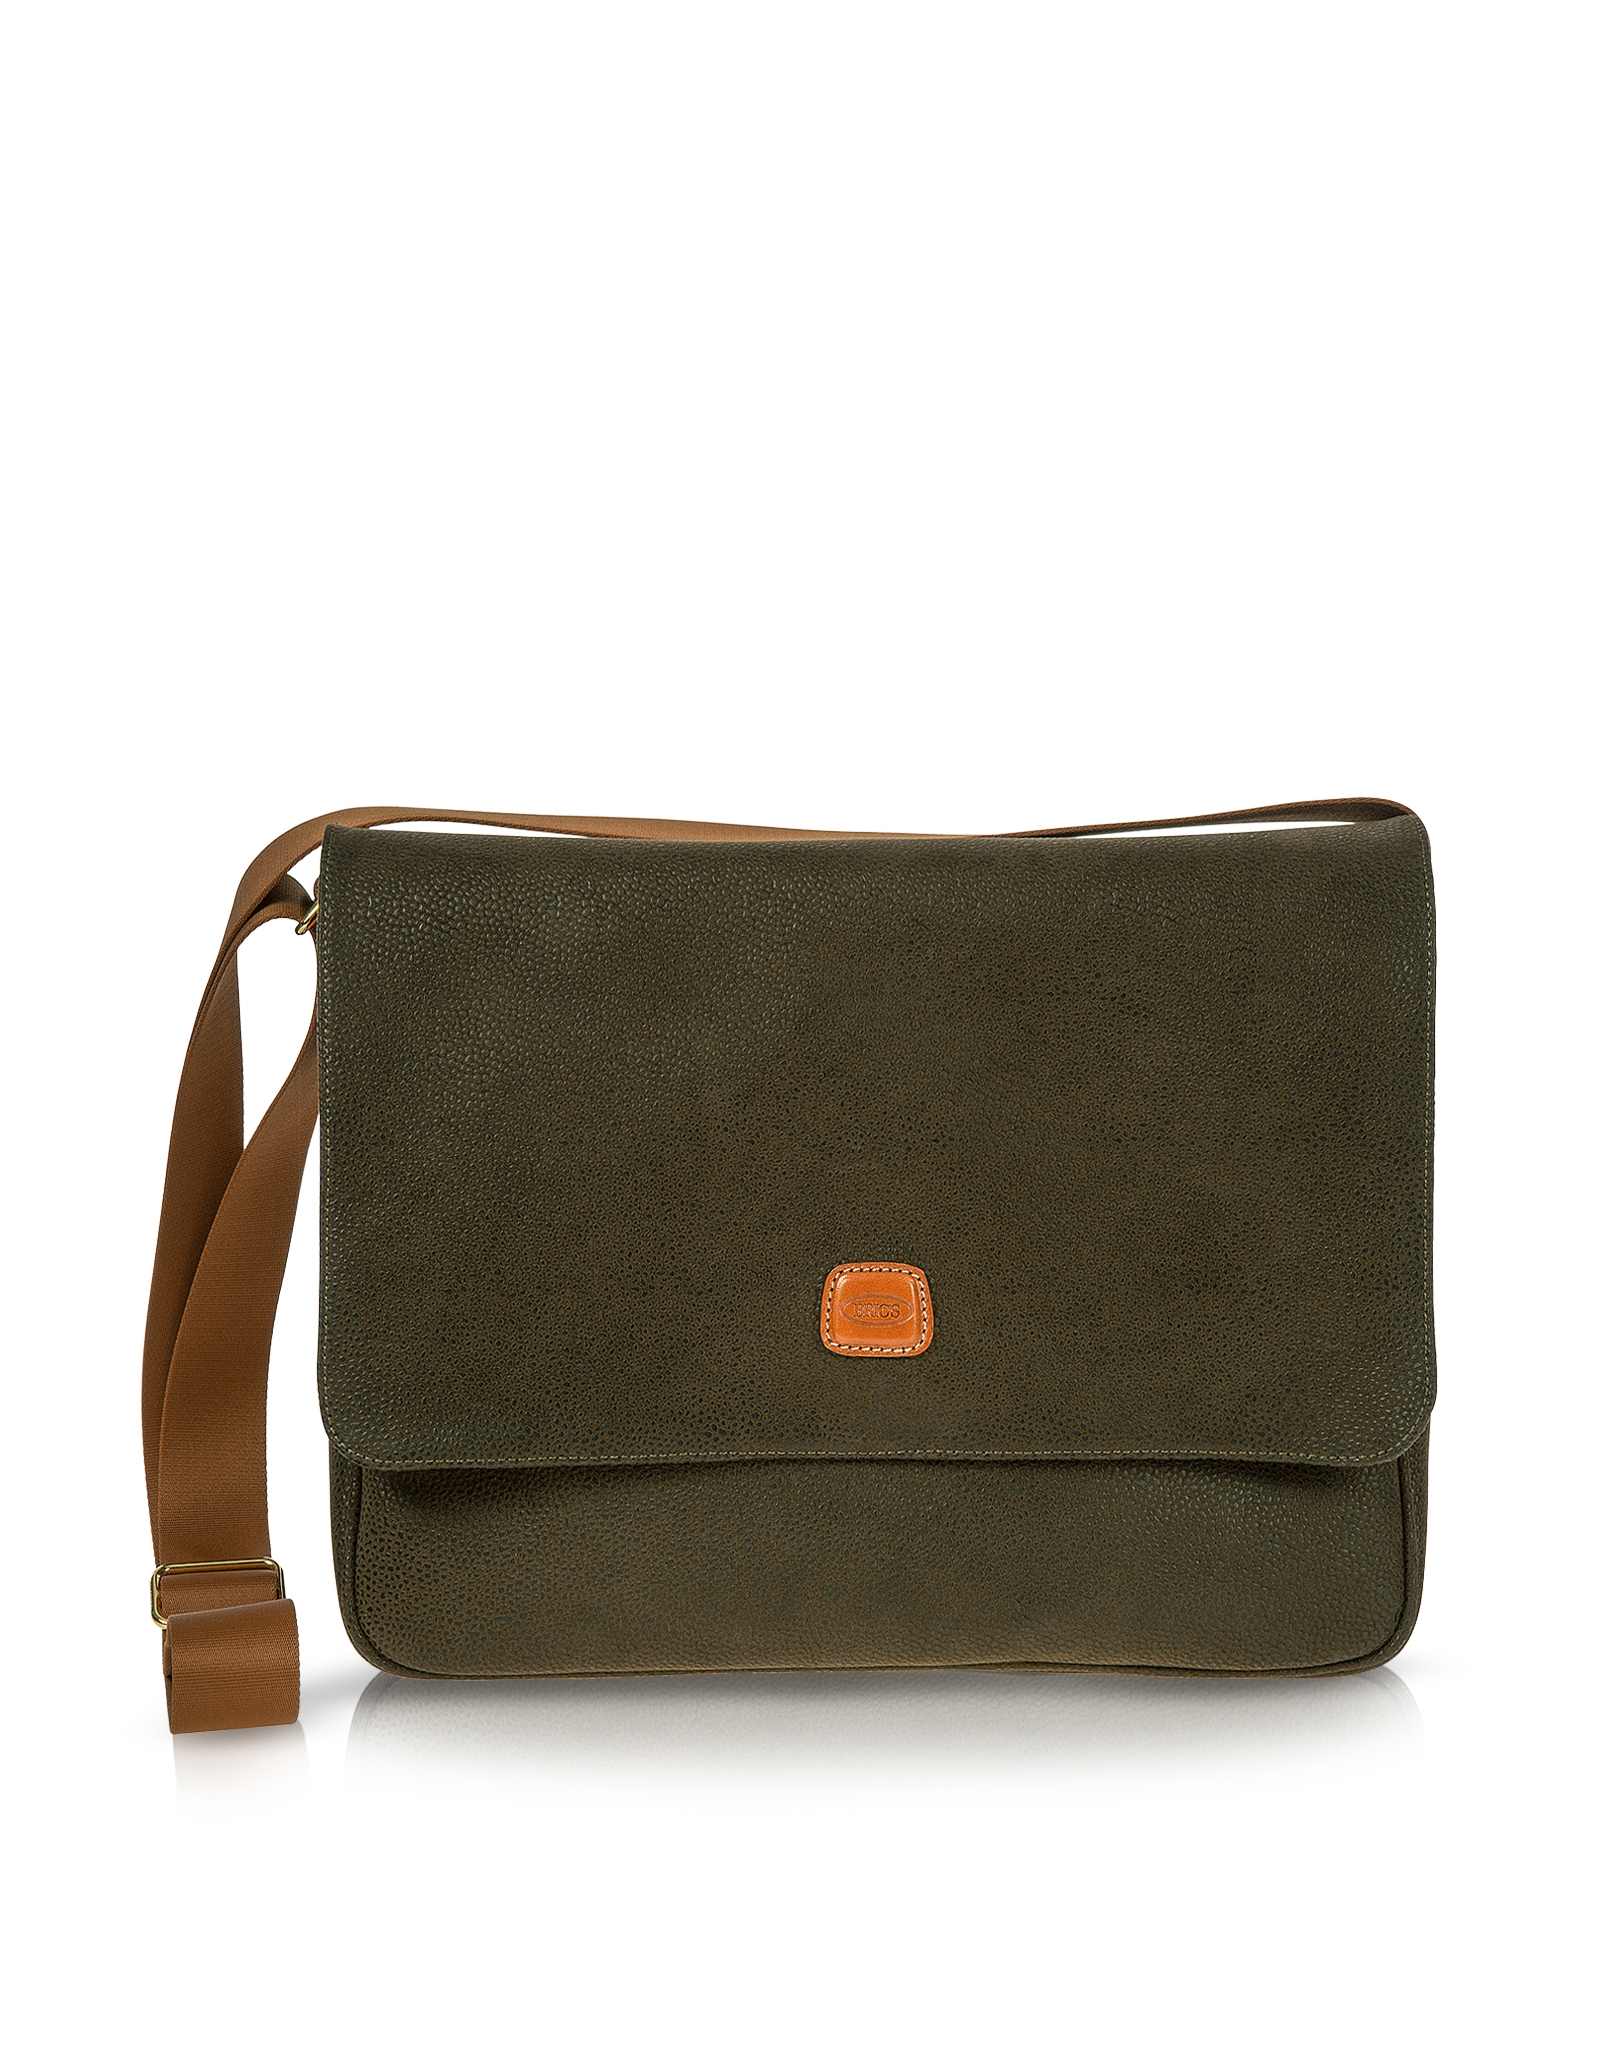 Lyst - Bric'S Life Olive Green Messenger Bag in Green